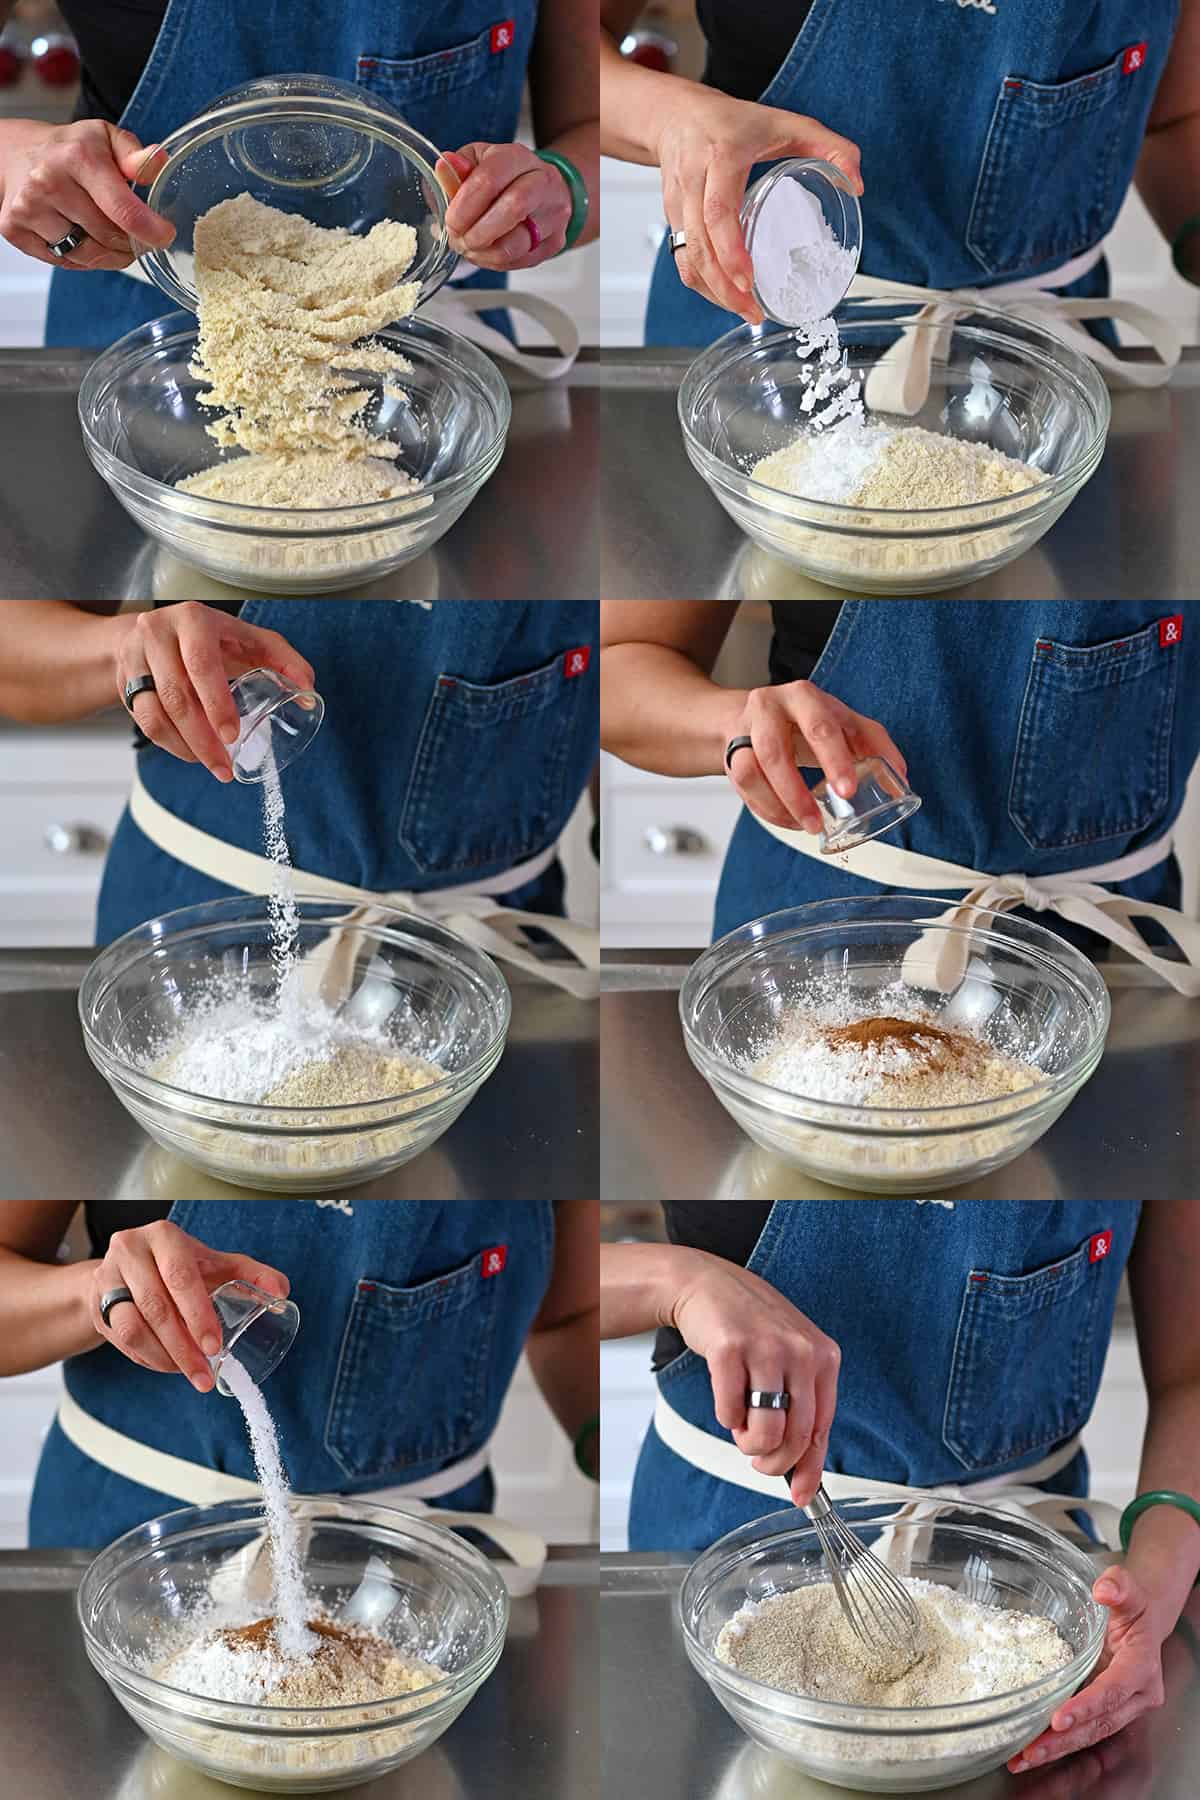 Six sequential photos that show someone combining the dry ingredients to make paleo banana cookies in a glass bowl.